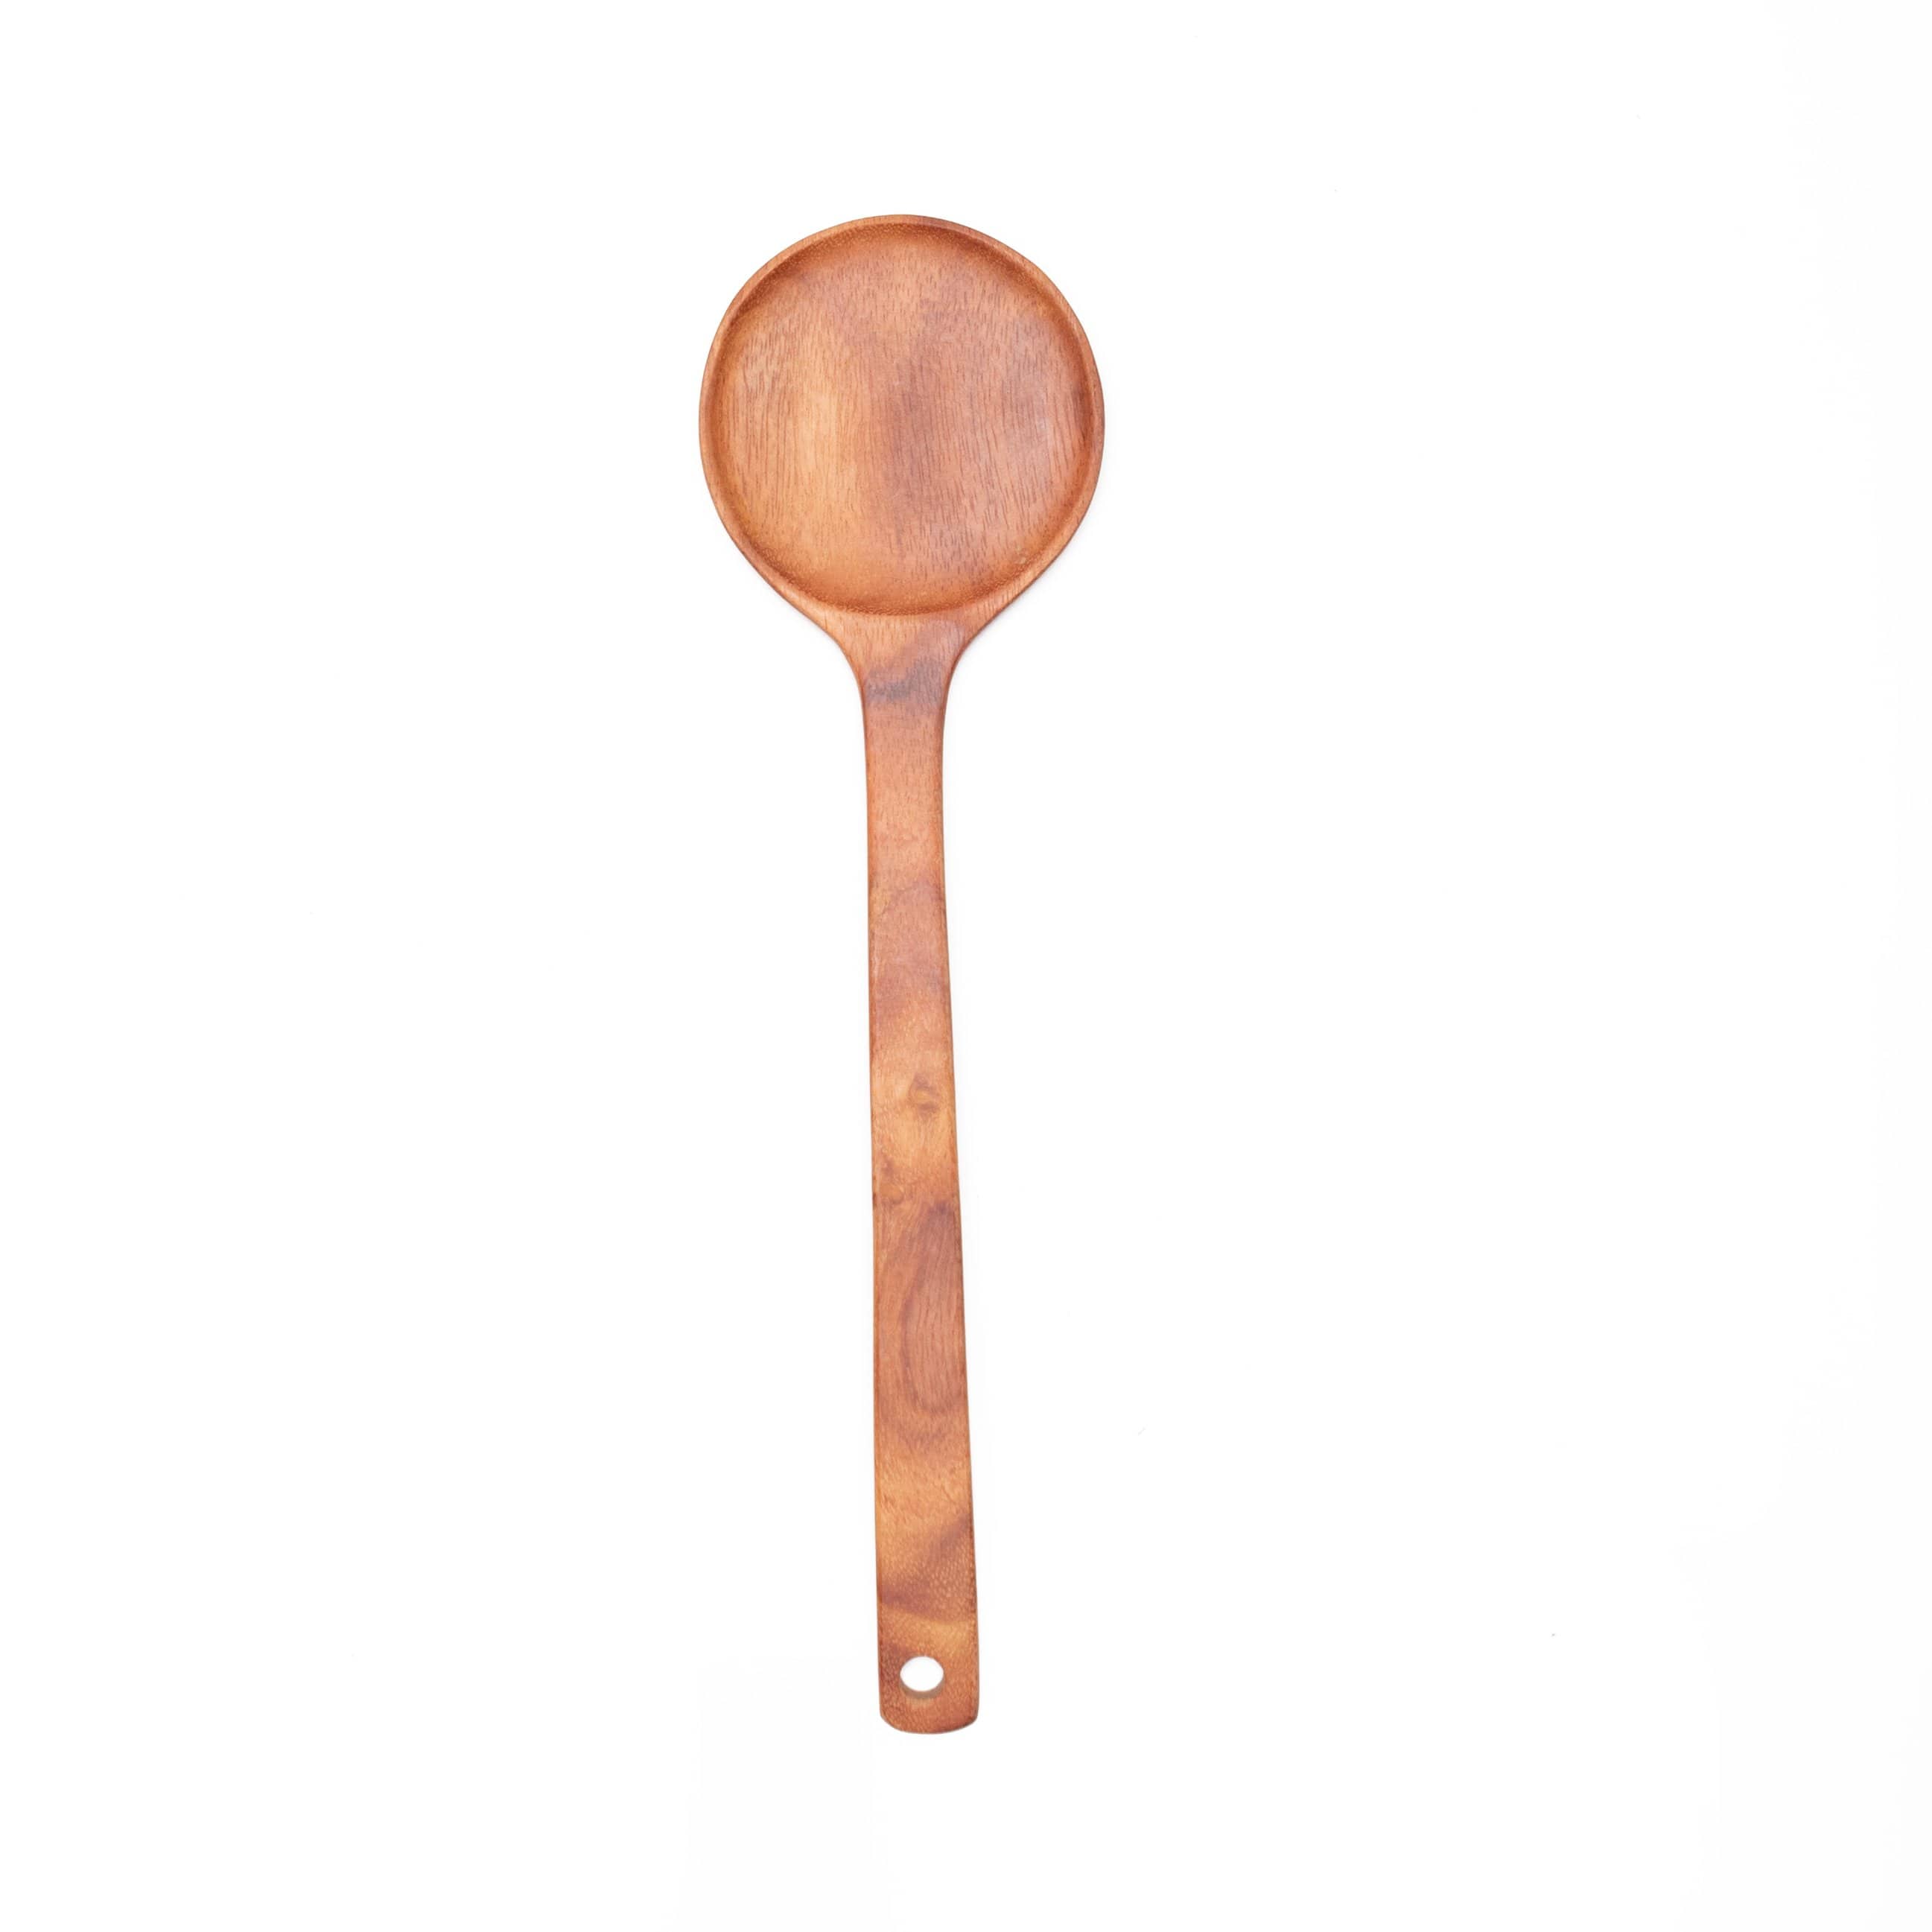 Hand-carved wood tasting spoon: sustainable macawood, laurelwood, or coffeewood. Artisan-made, fair trade, unique gift. Elevate your cooking & taste! ✨